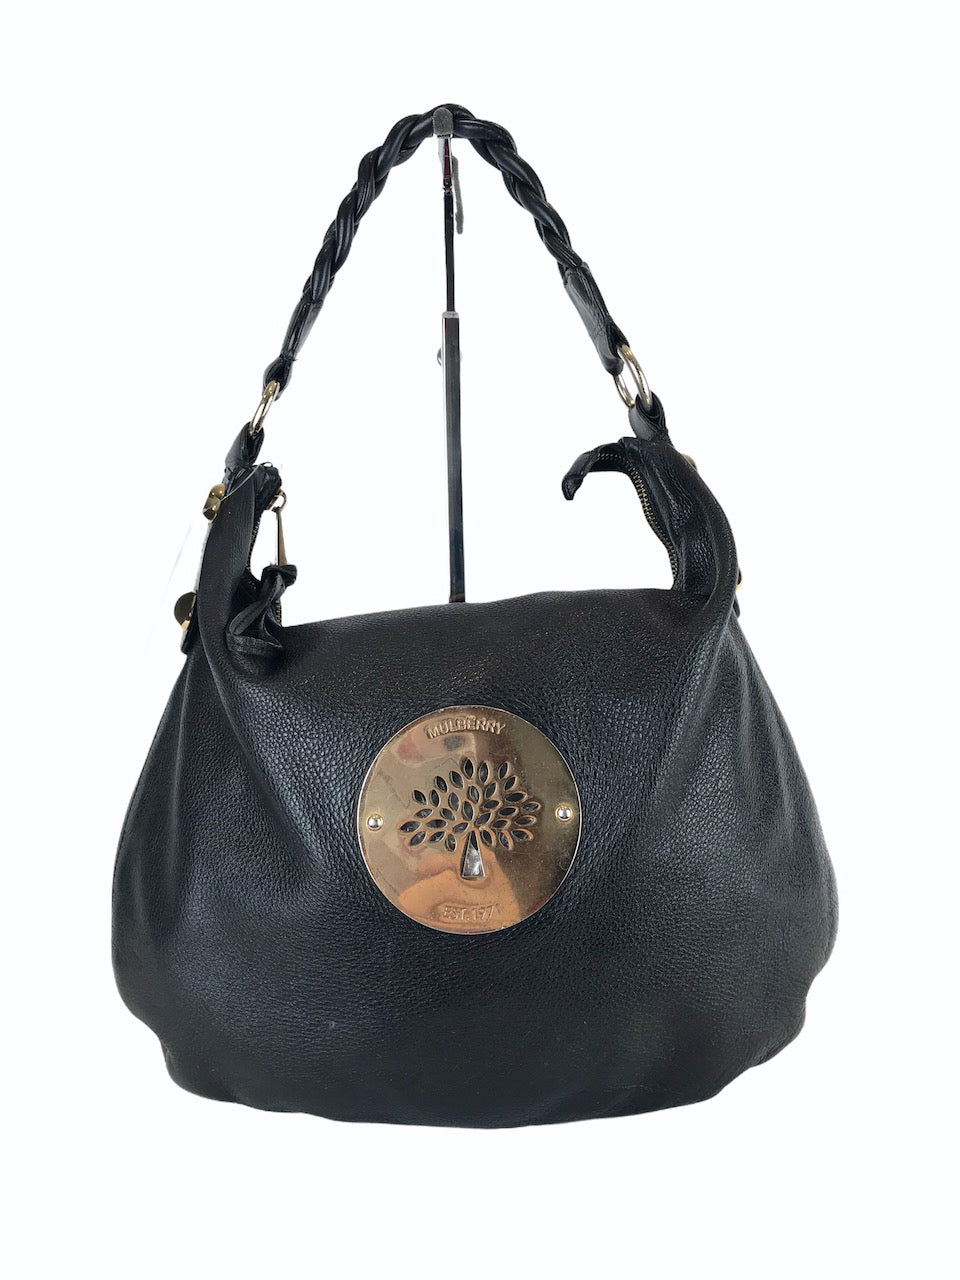 Mulberry Black Leather Mitzy Hobo - As Seen On Instagram 09/09/2020 - Siopaella Designer Exchange